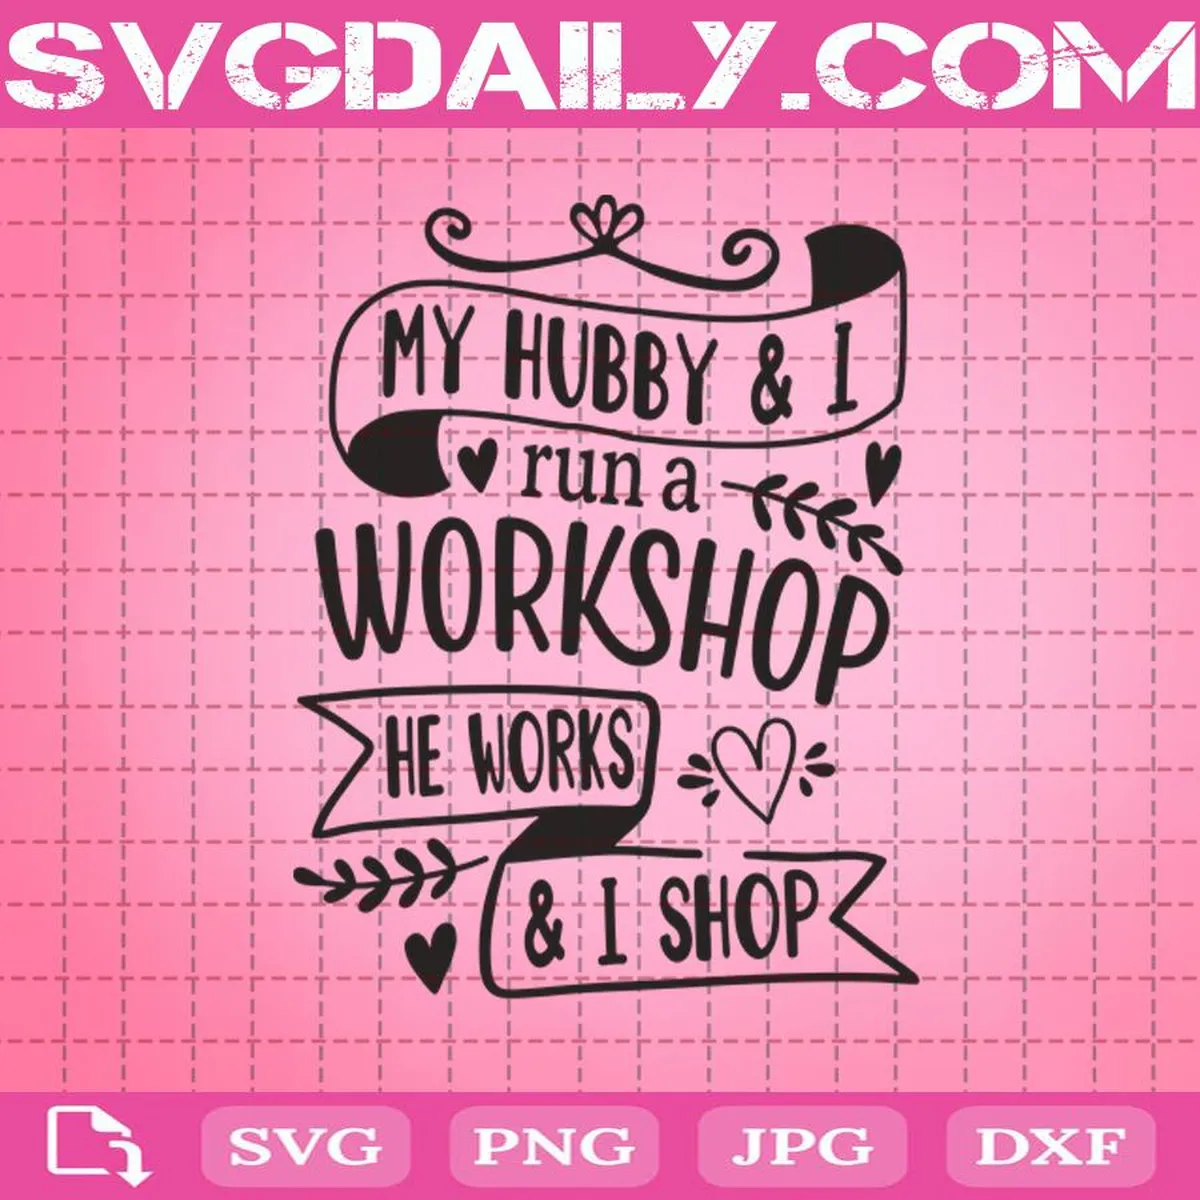 My Hubby And I Run A Workshop He Workshop He Works & I Shop Svg, Shopping Svg, Marriage Saying Svg, Husband And Wife Svg